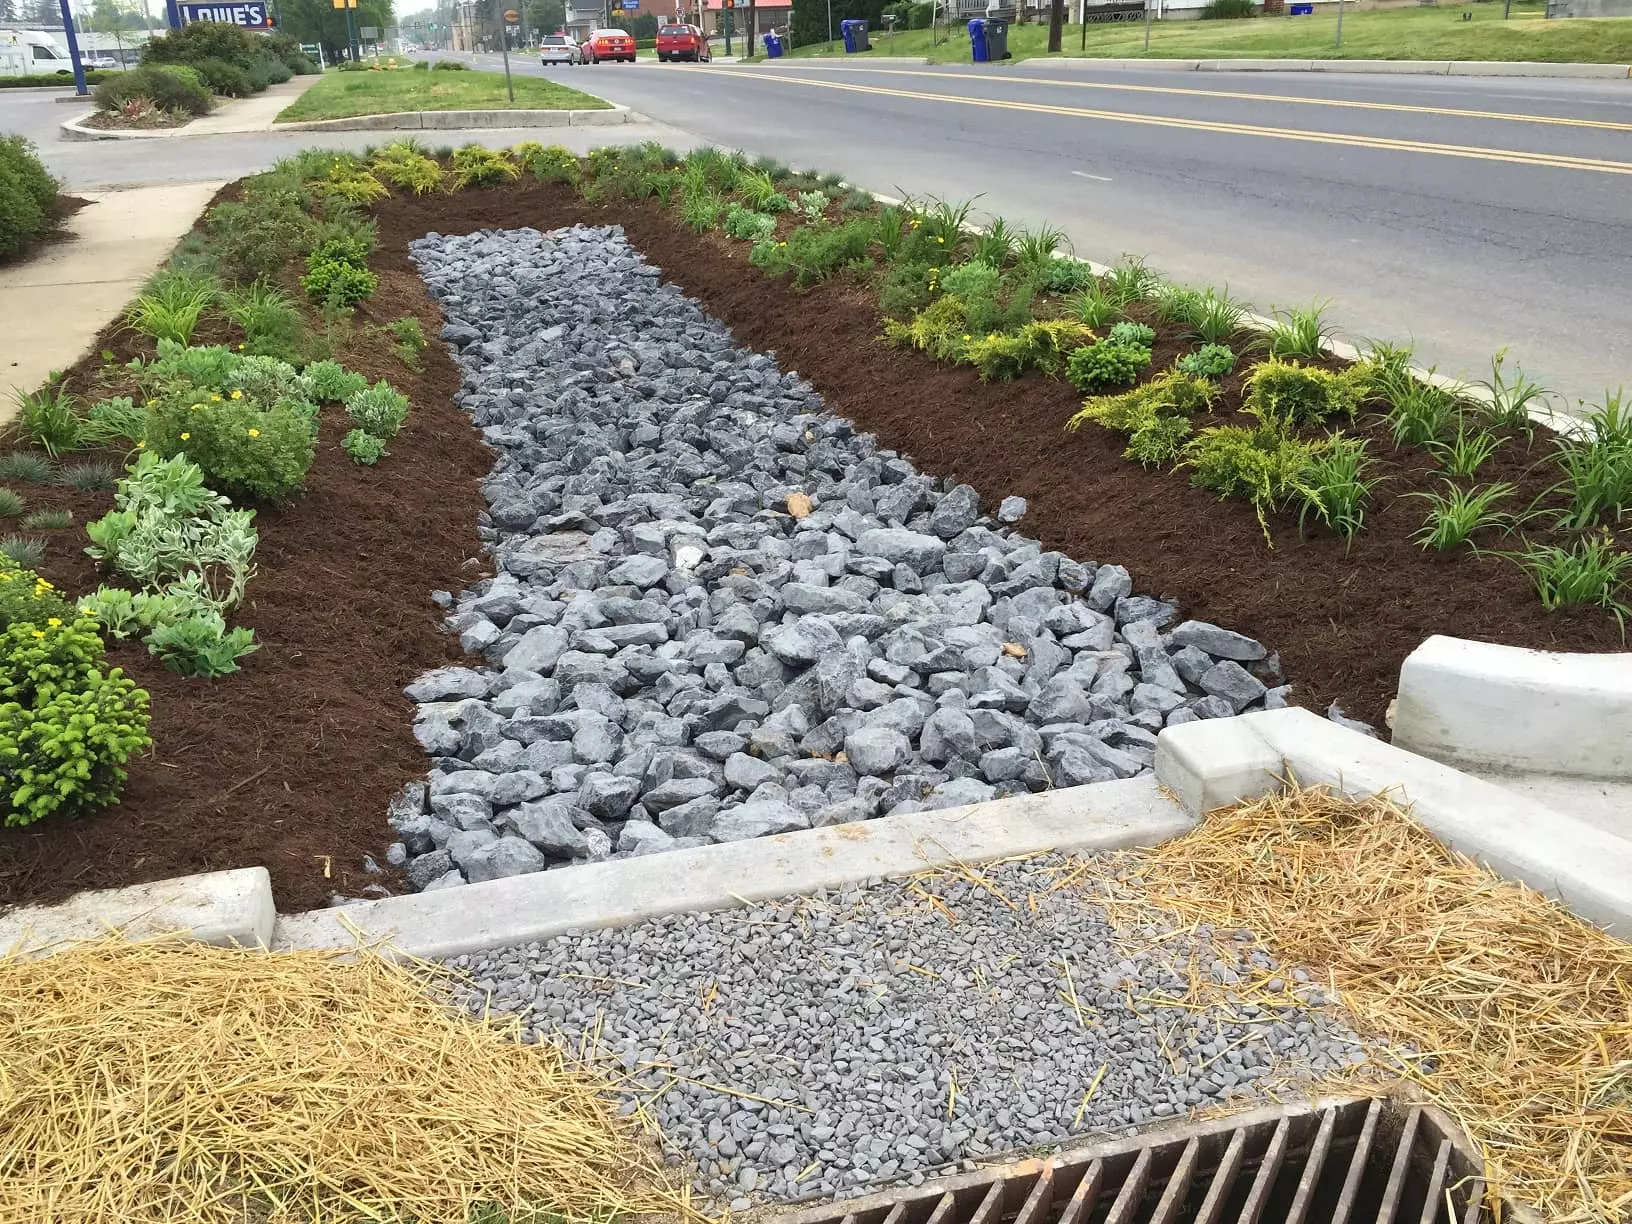 Plants and mulch surround rocks serving as a collection point for stormwater runoff.